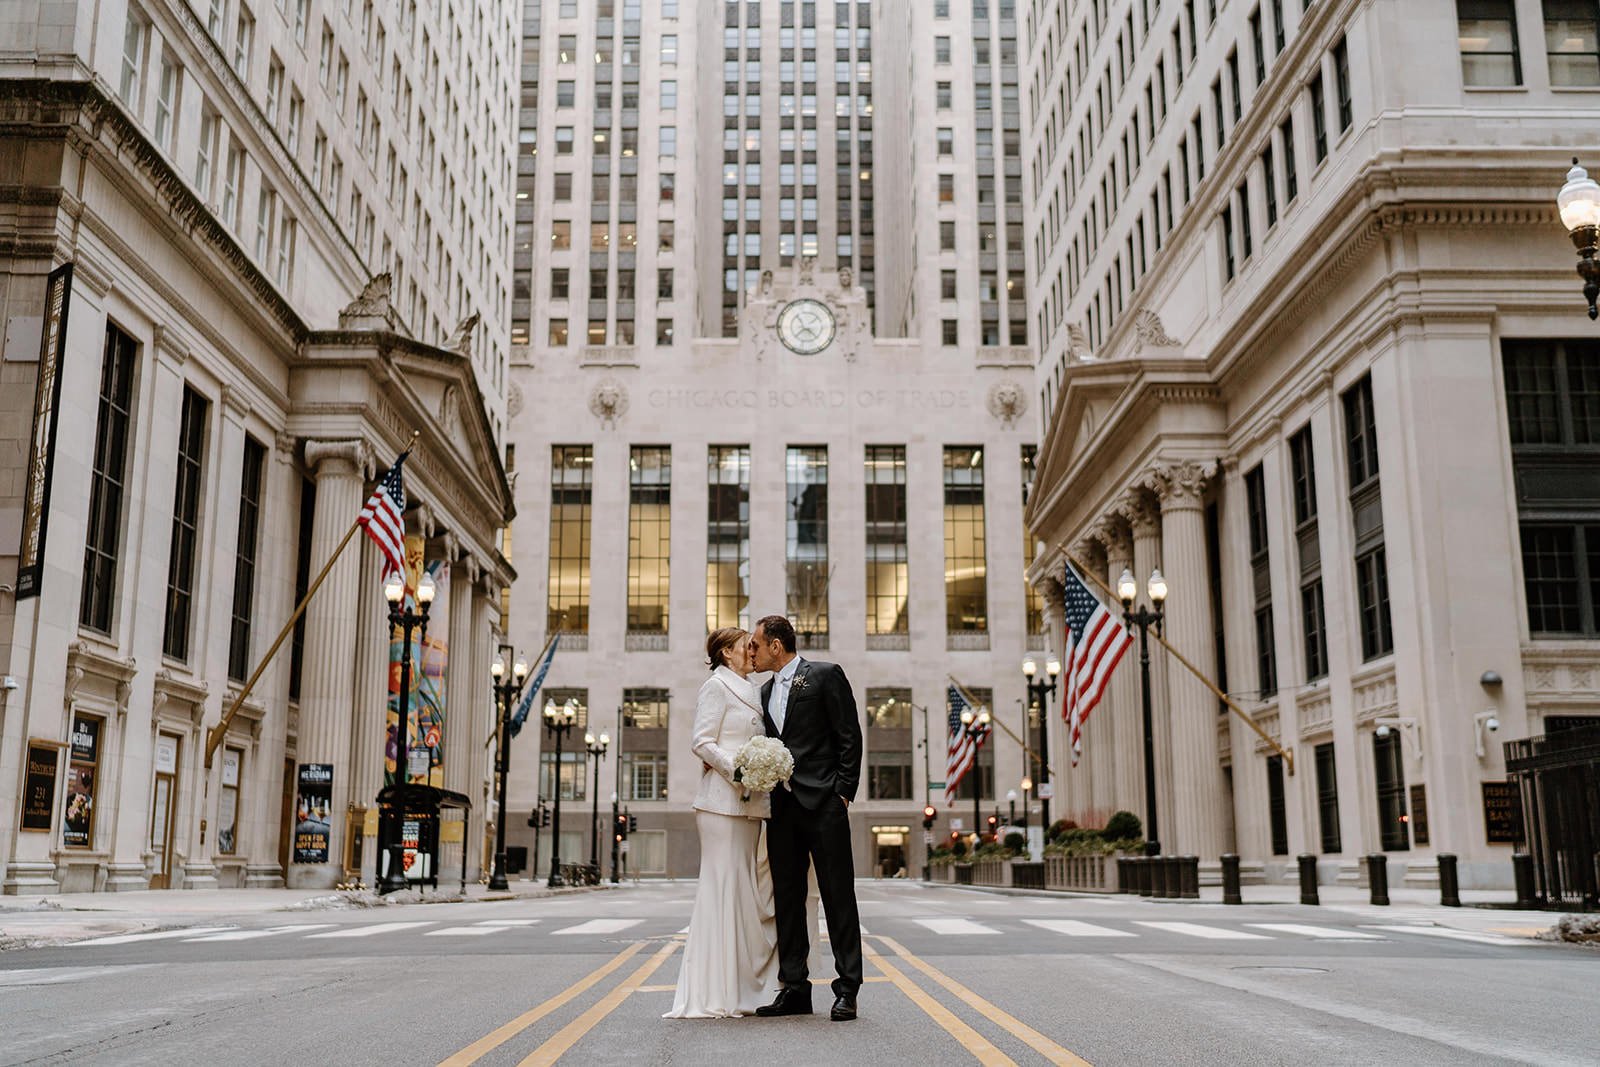 Couple poses in front of the Chicago Board of Trade building